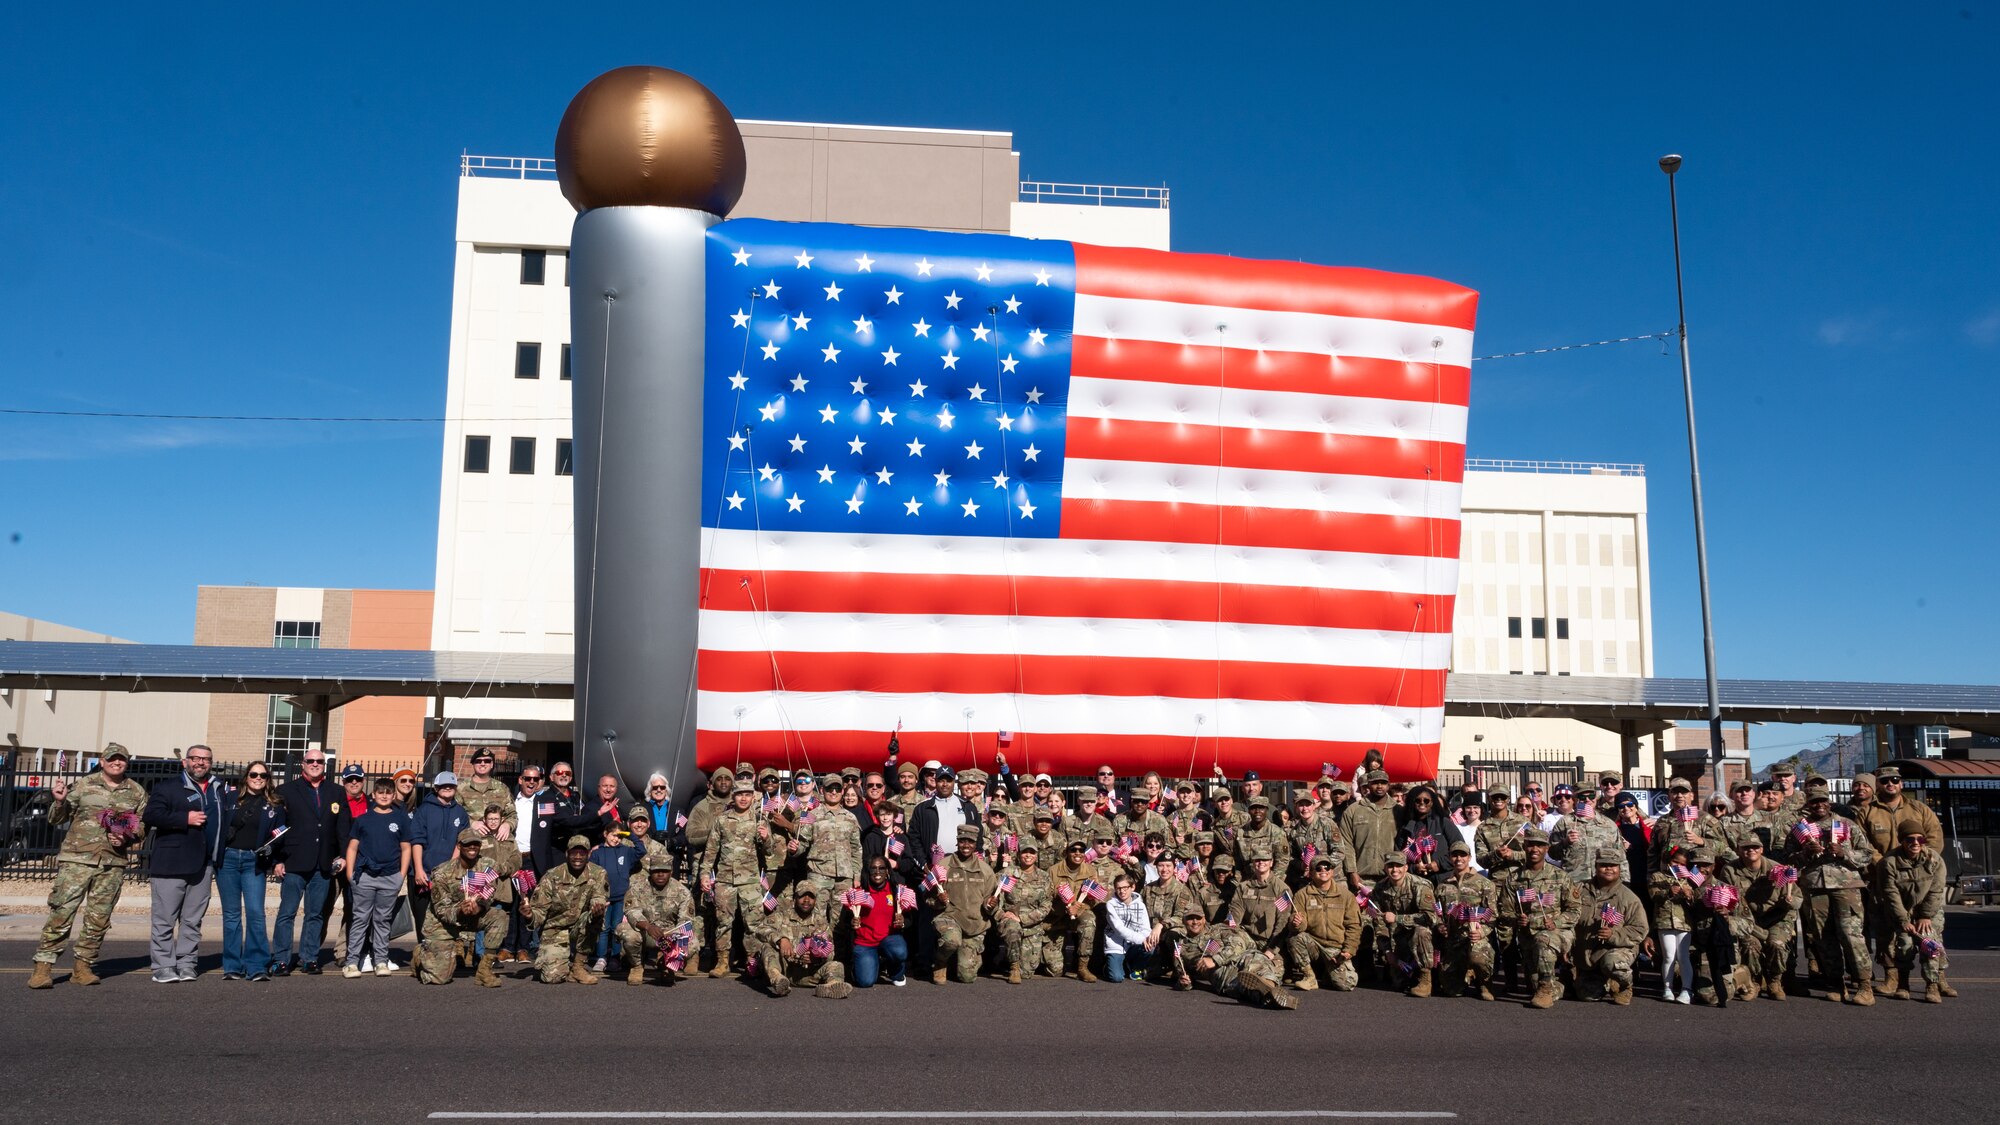 U.S. Air Force Airmen and members of the Fighter Country Foundation pose for a group photo during the Fiesta Bowl Parade, Dec. 17, 2022, in Phoenix, Arizona.